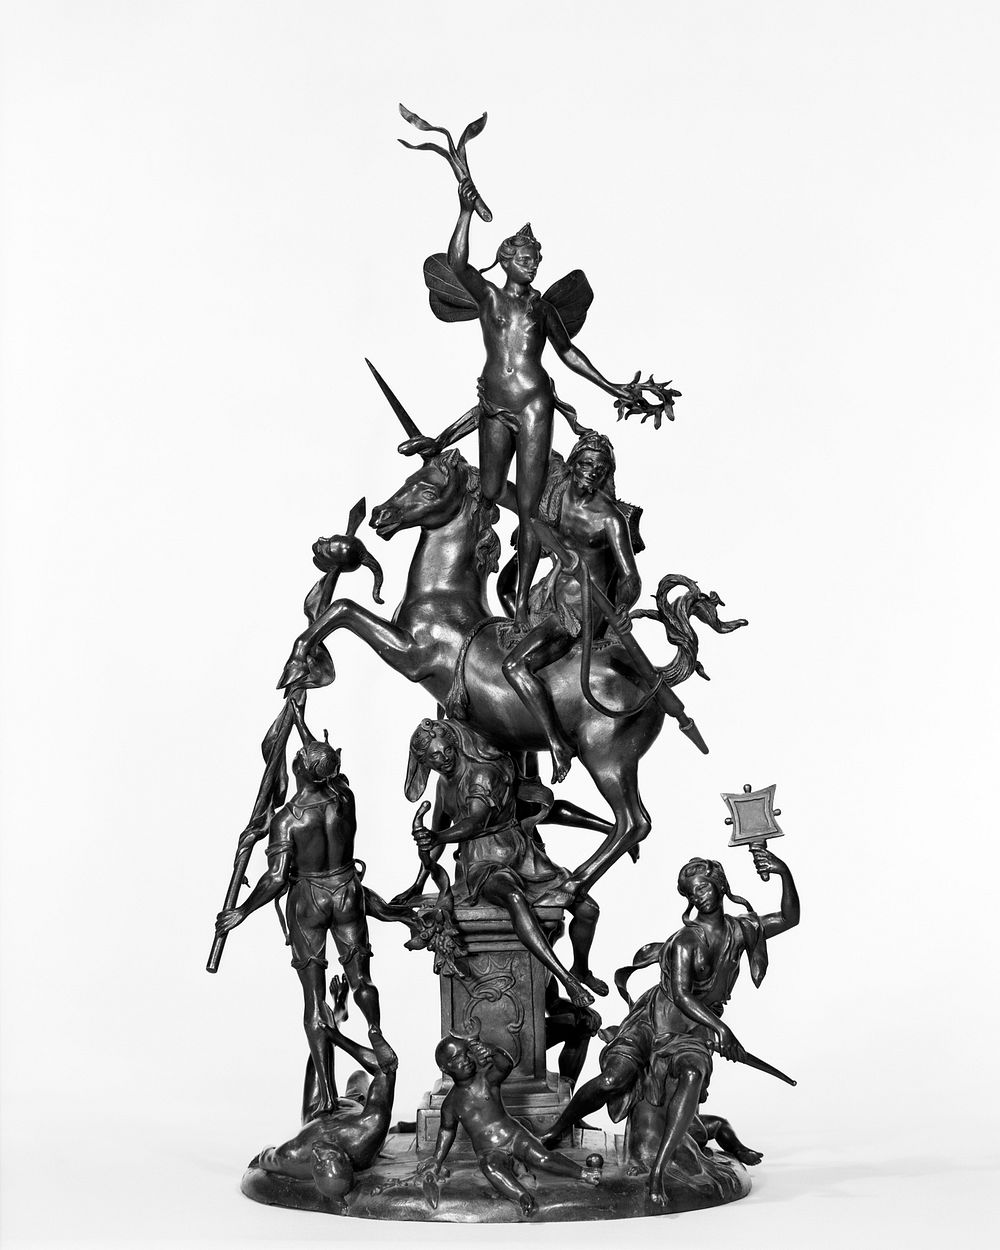 Allegorical Group of Victory Supported by Valor by Francesco Bertos